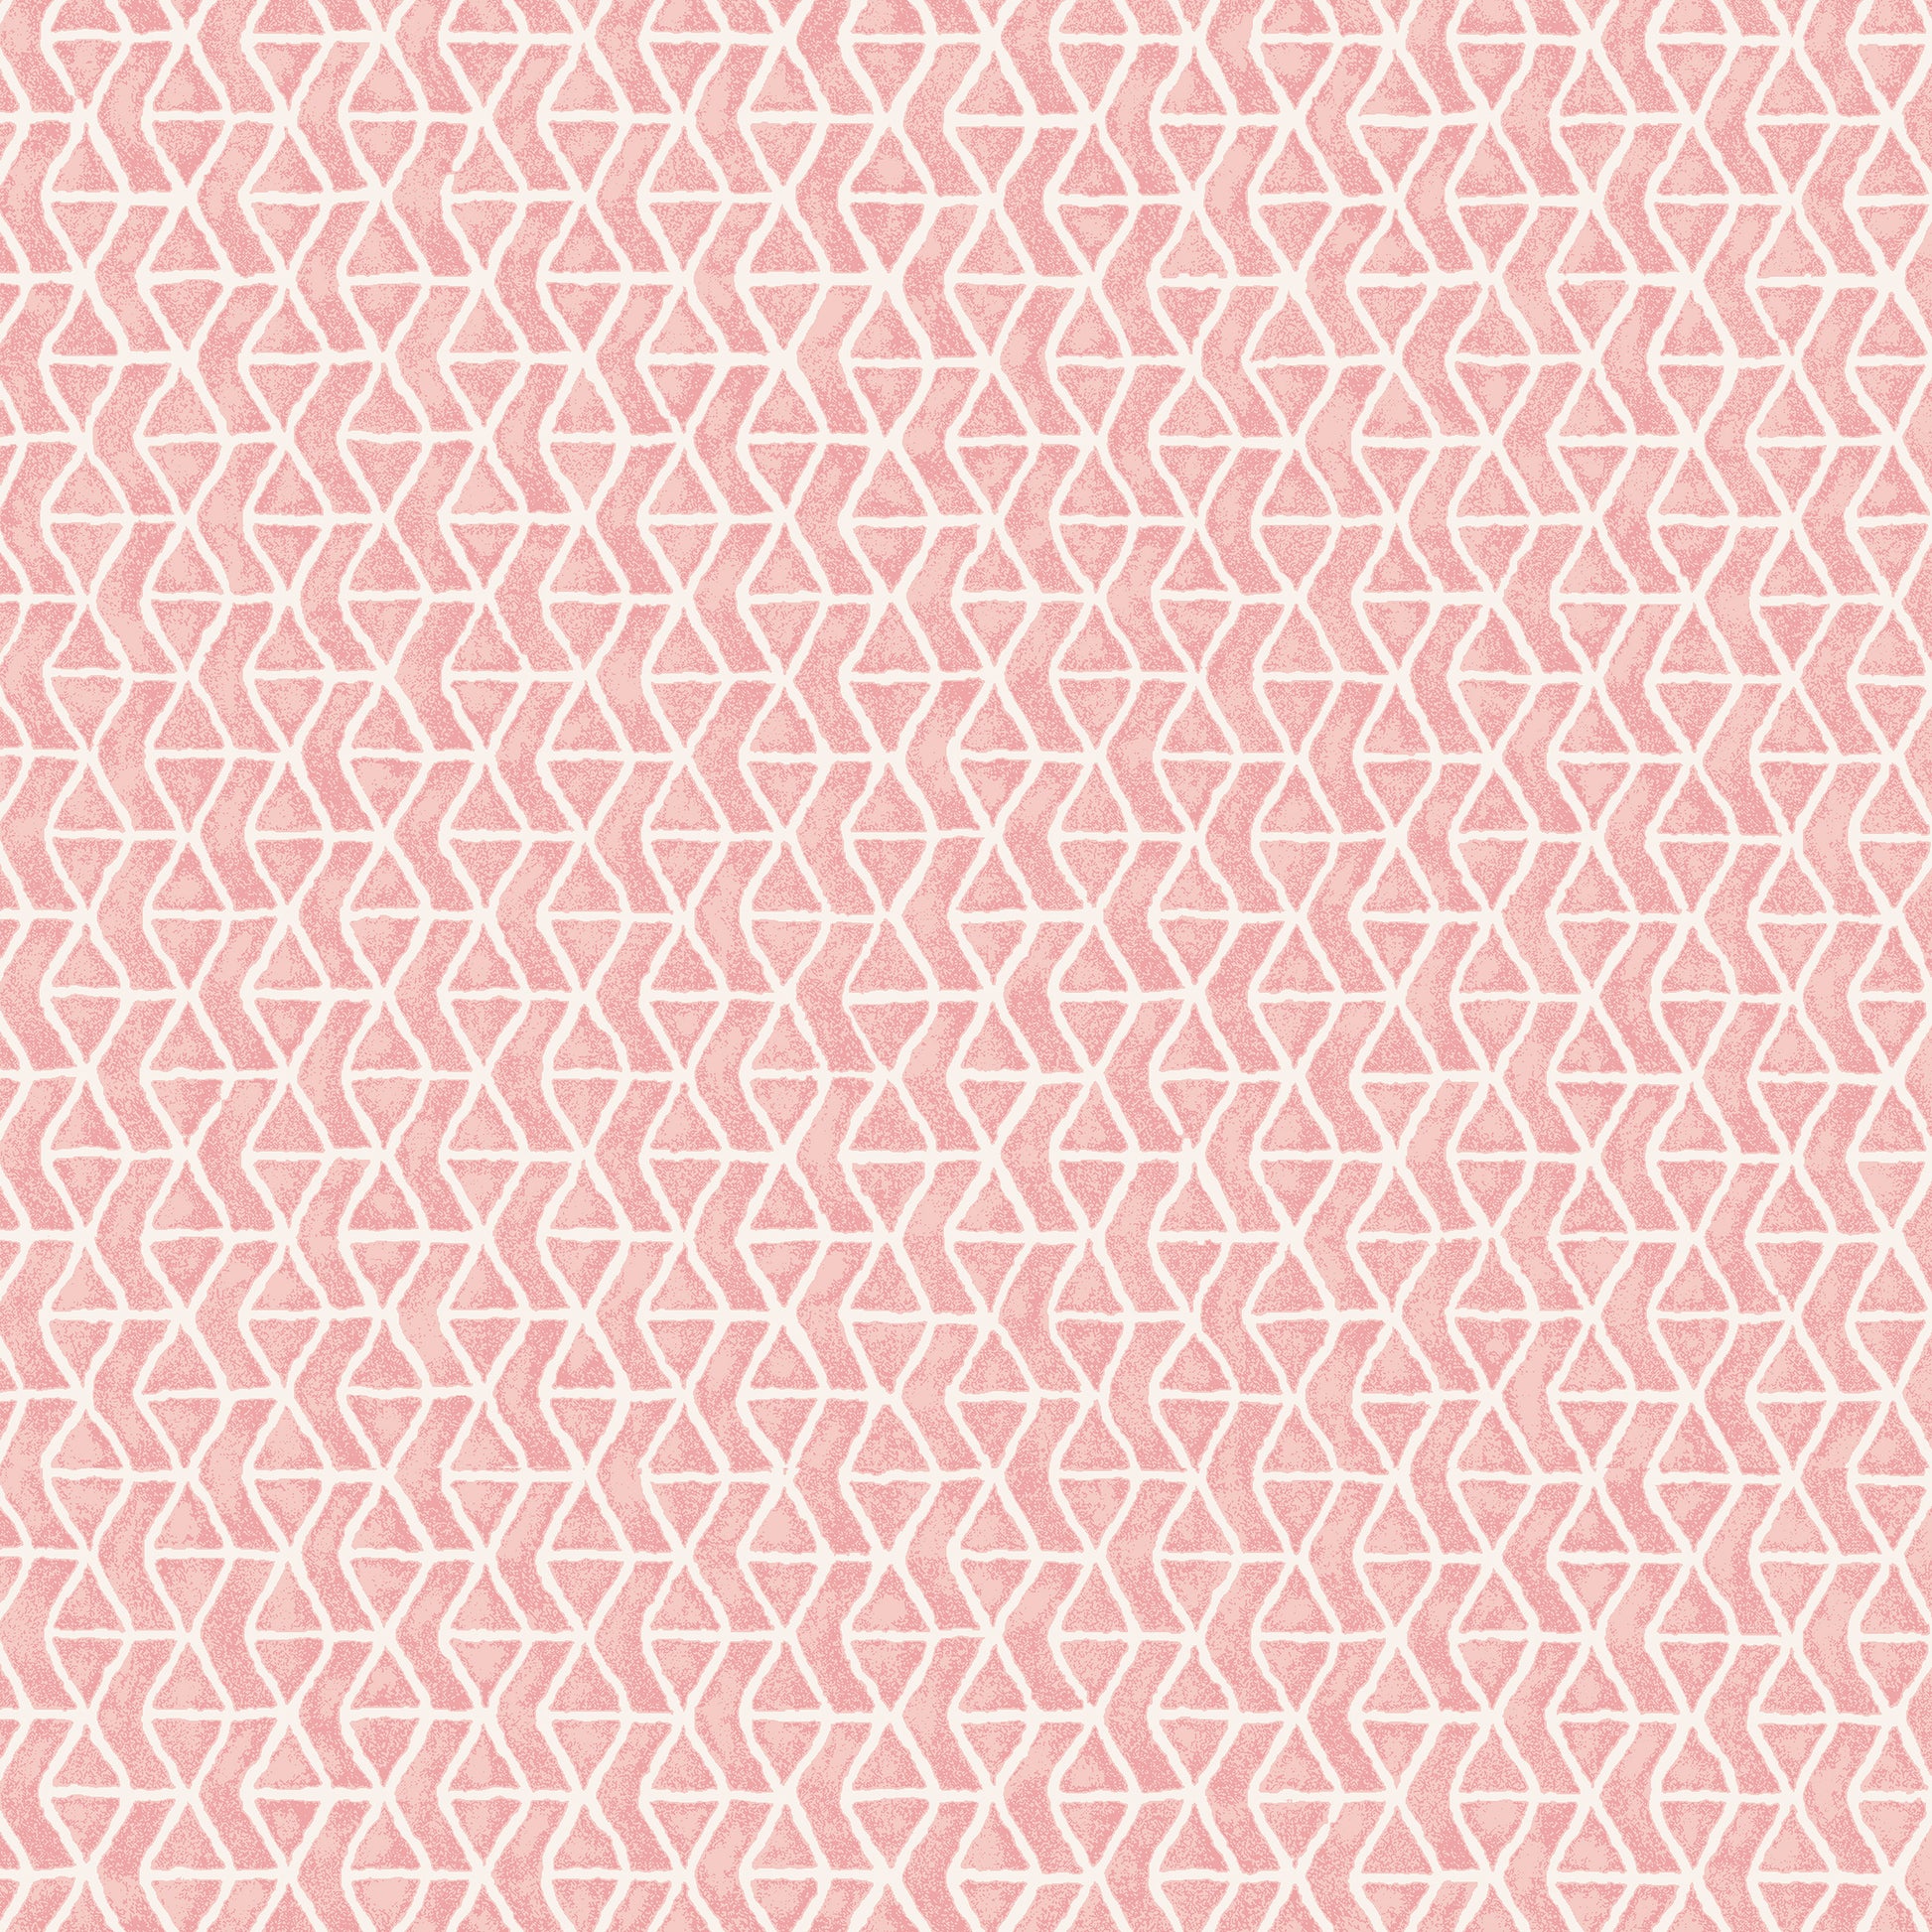 Purchase Thibaut Wallpaper Product T42001 pattern name Stony Brook color Blush. 